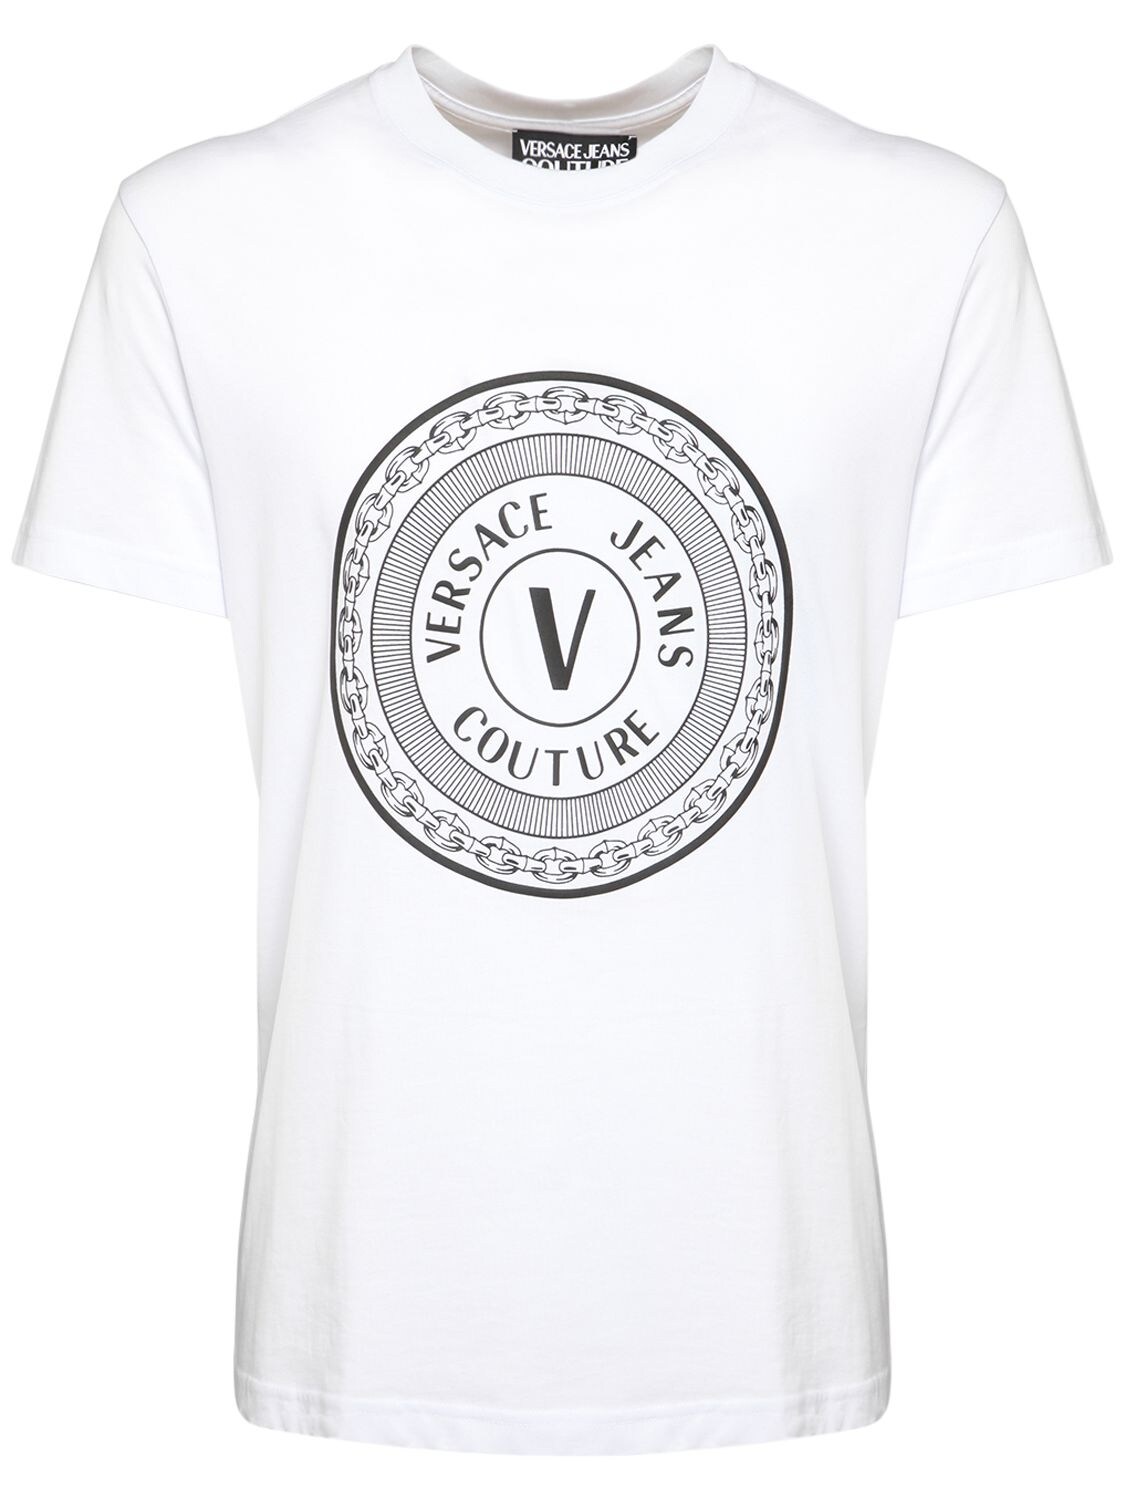 VERSACE JEANS COUTURE LOGO纯棉T恤,73IBQN004-MDAZ0